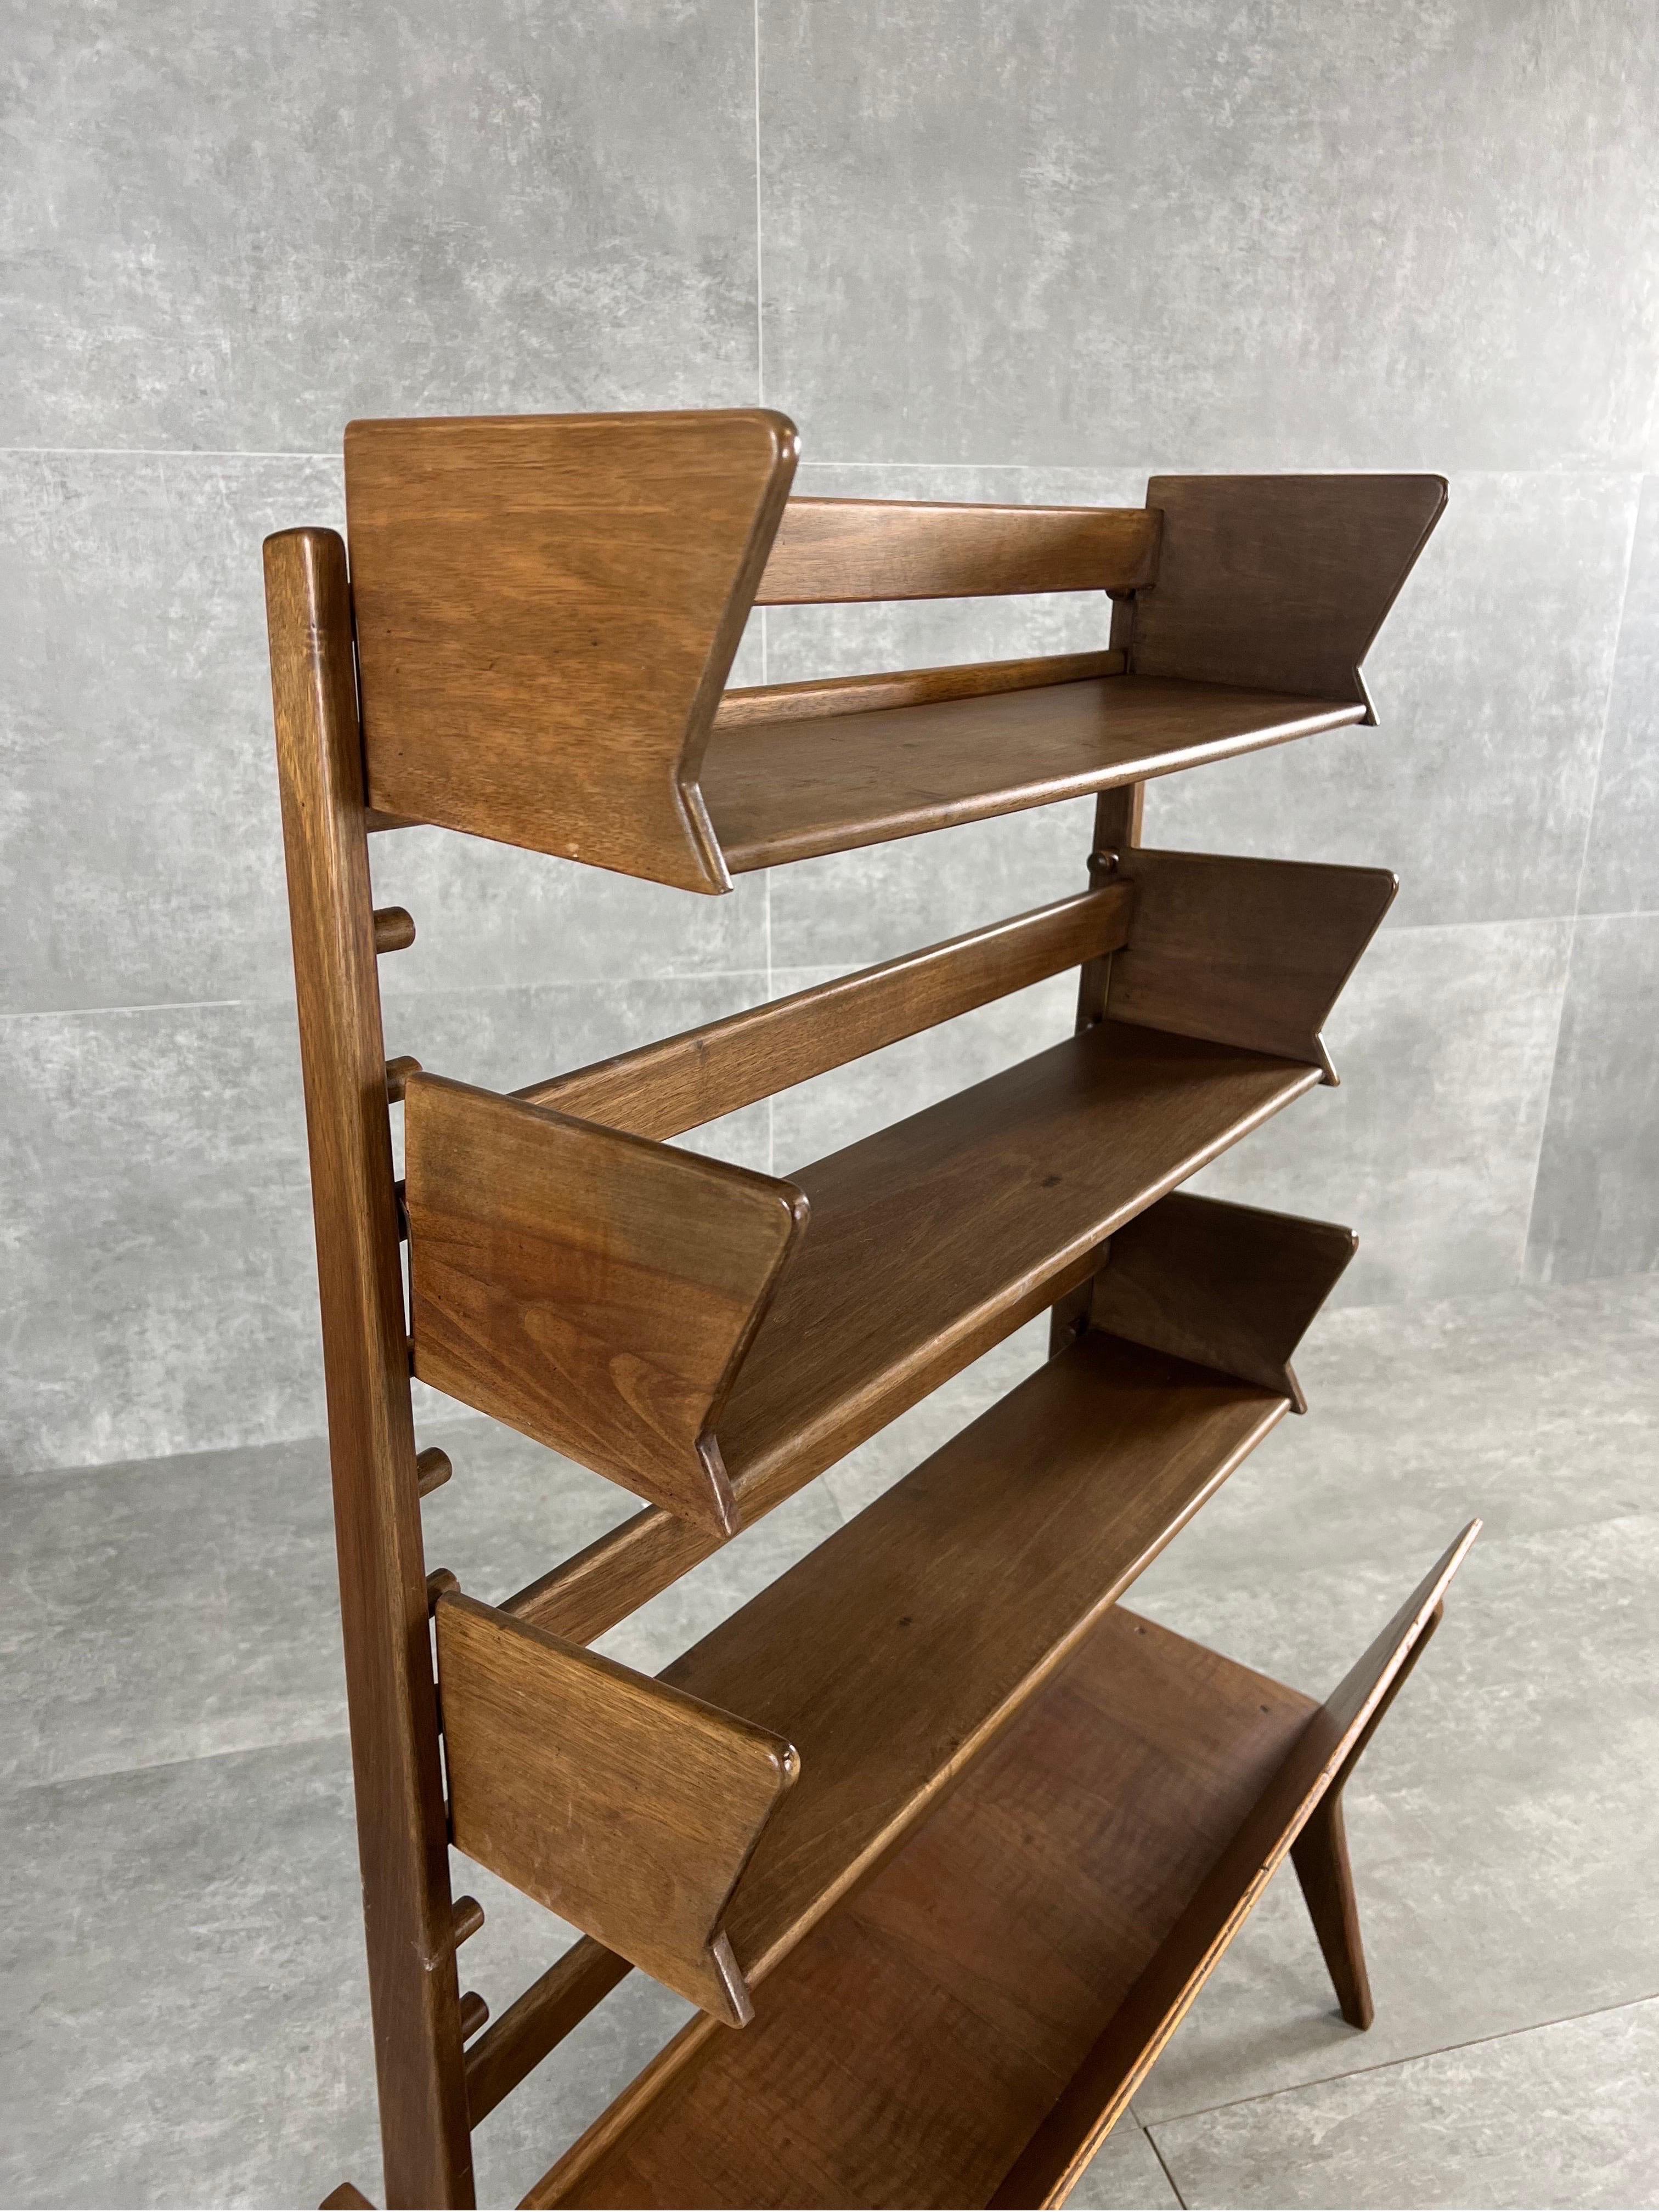 Small library with wooden structure designed by Guglielmo Pecorini and produced in Italy during 1950s. Shelves can be collocated in the preferred height.